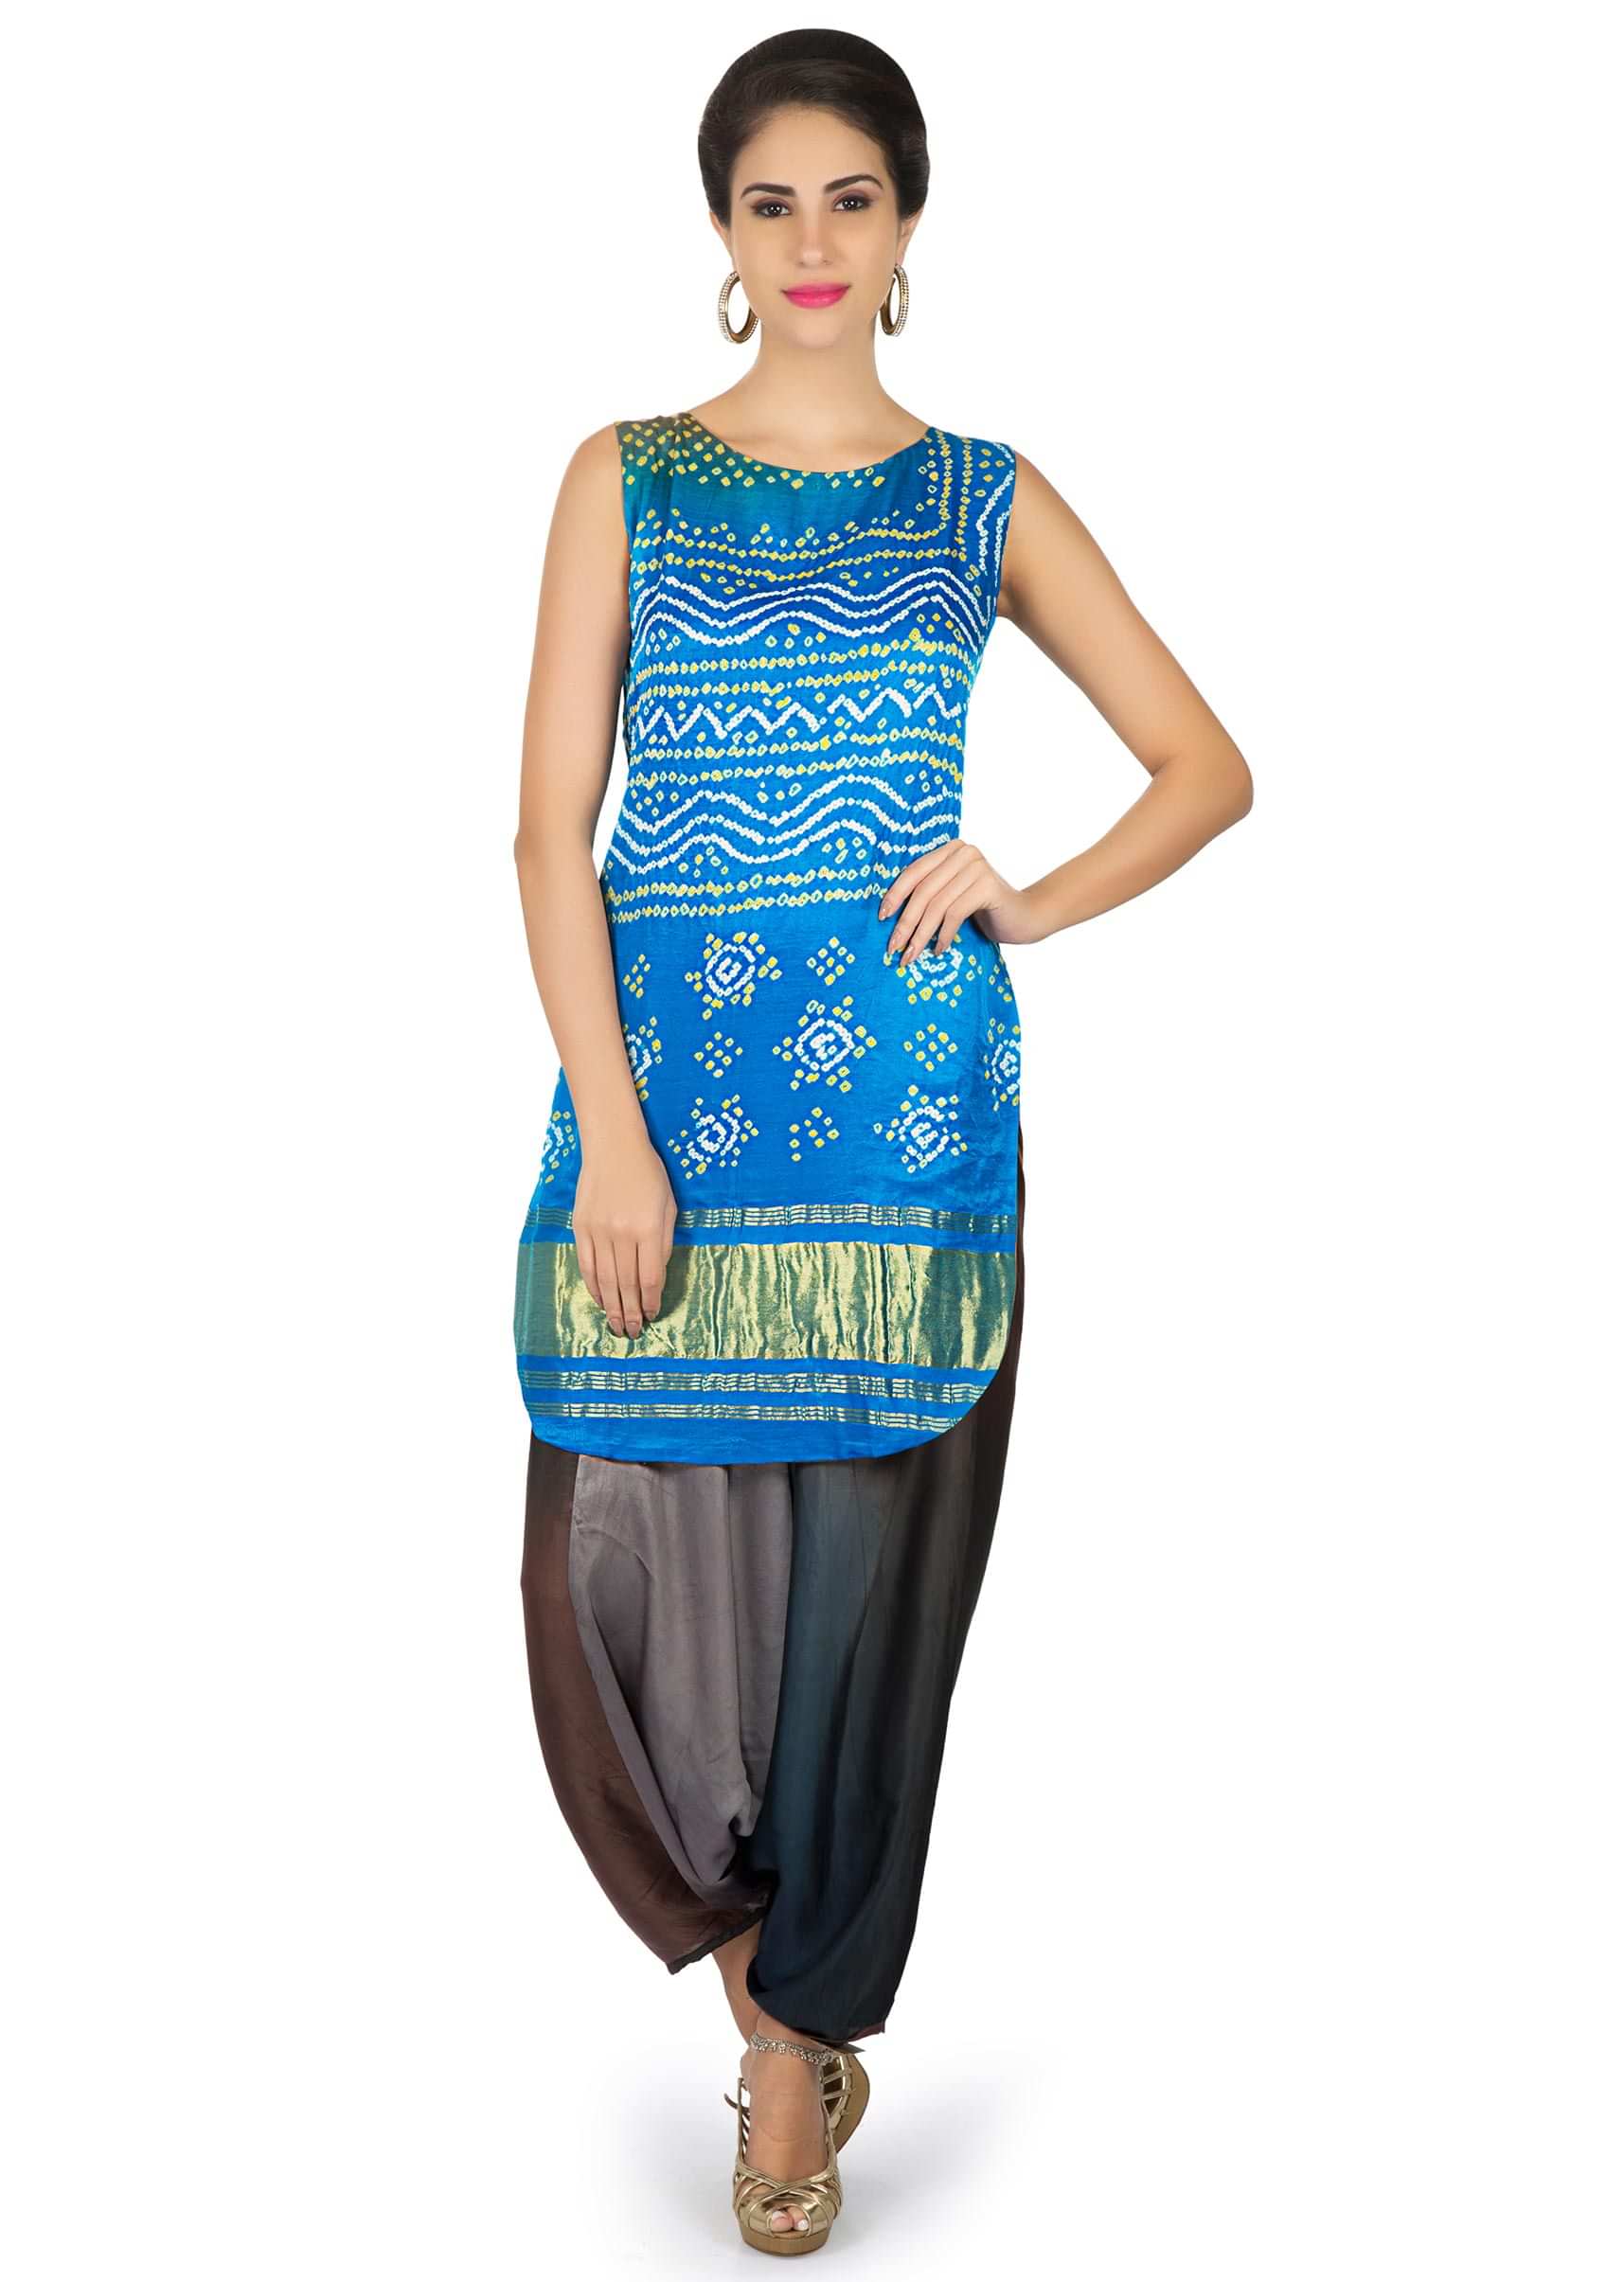 Diva blue satin top in bandhani print matched with Aladdin pants only on Kalki